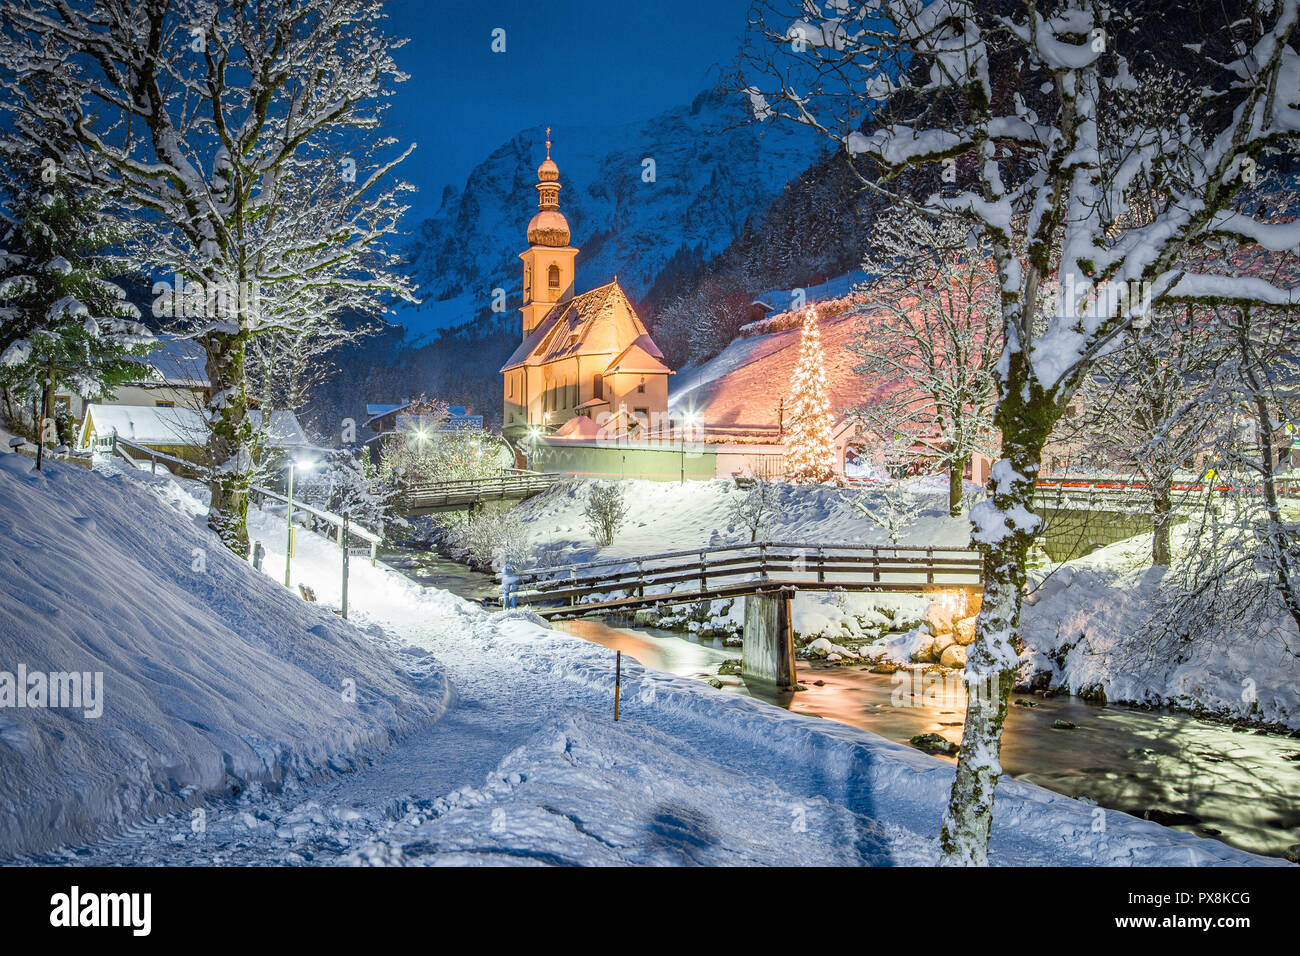 Beautiful twilight view of Sankt Sebastian pilgrimage church with decorated Christmas tree illuminated during blue hour at dusk in winter, Ramsau, Nat Stock Photo